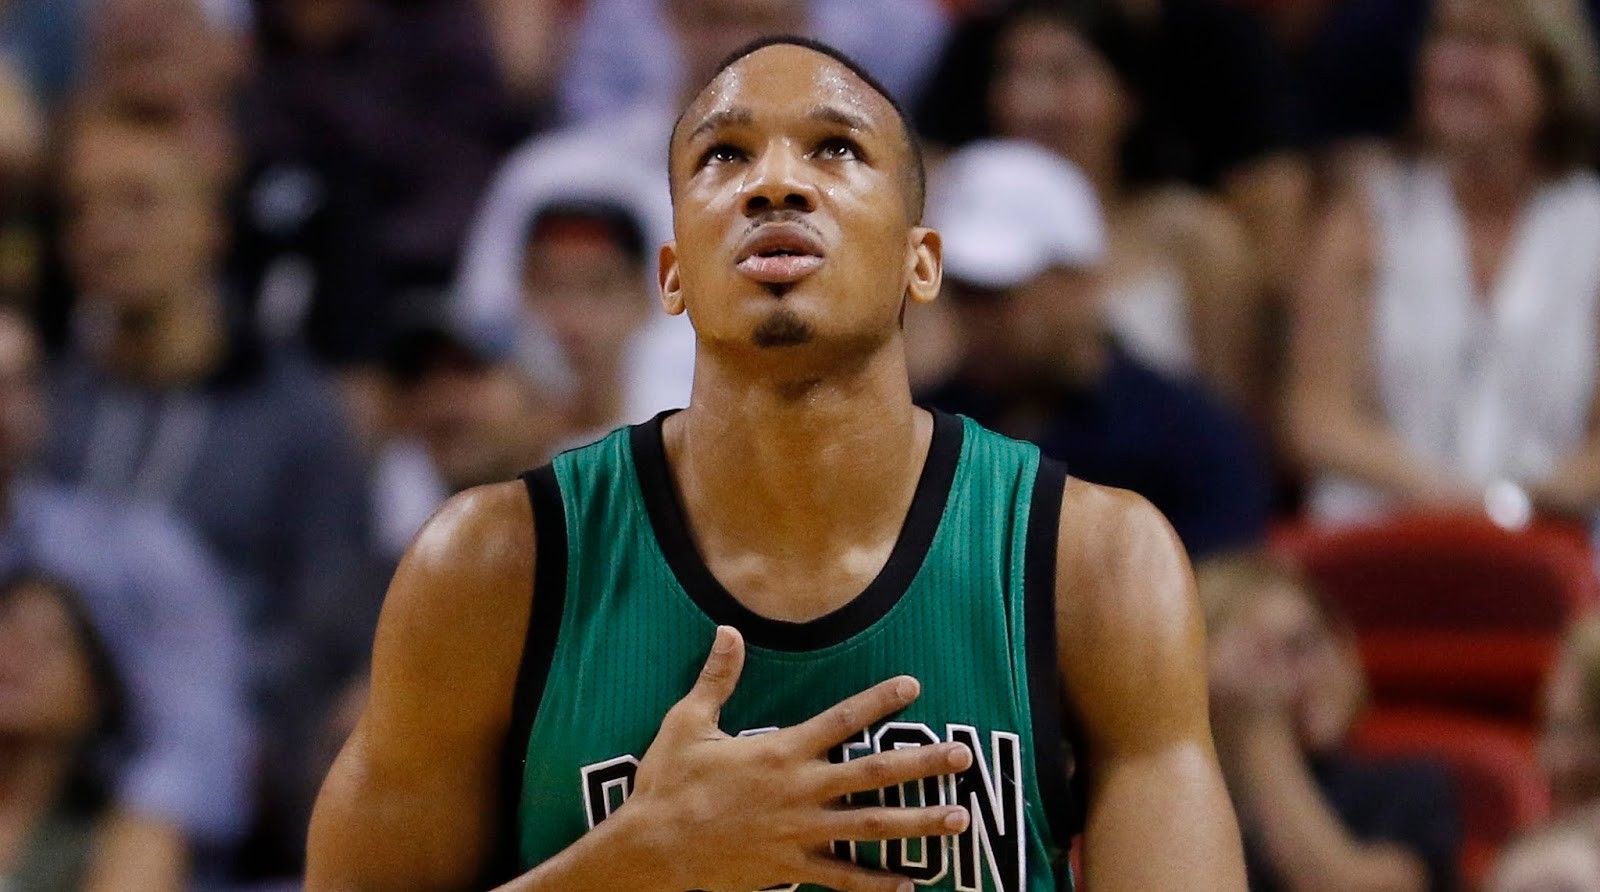 Can Avery Bradley Continue His Hot Start